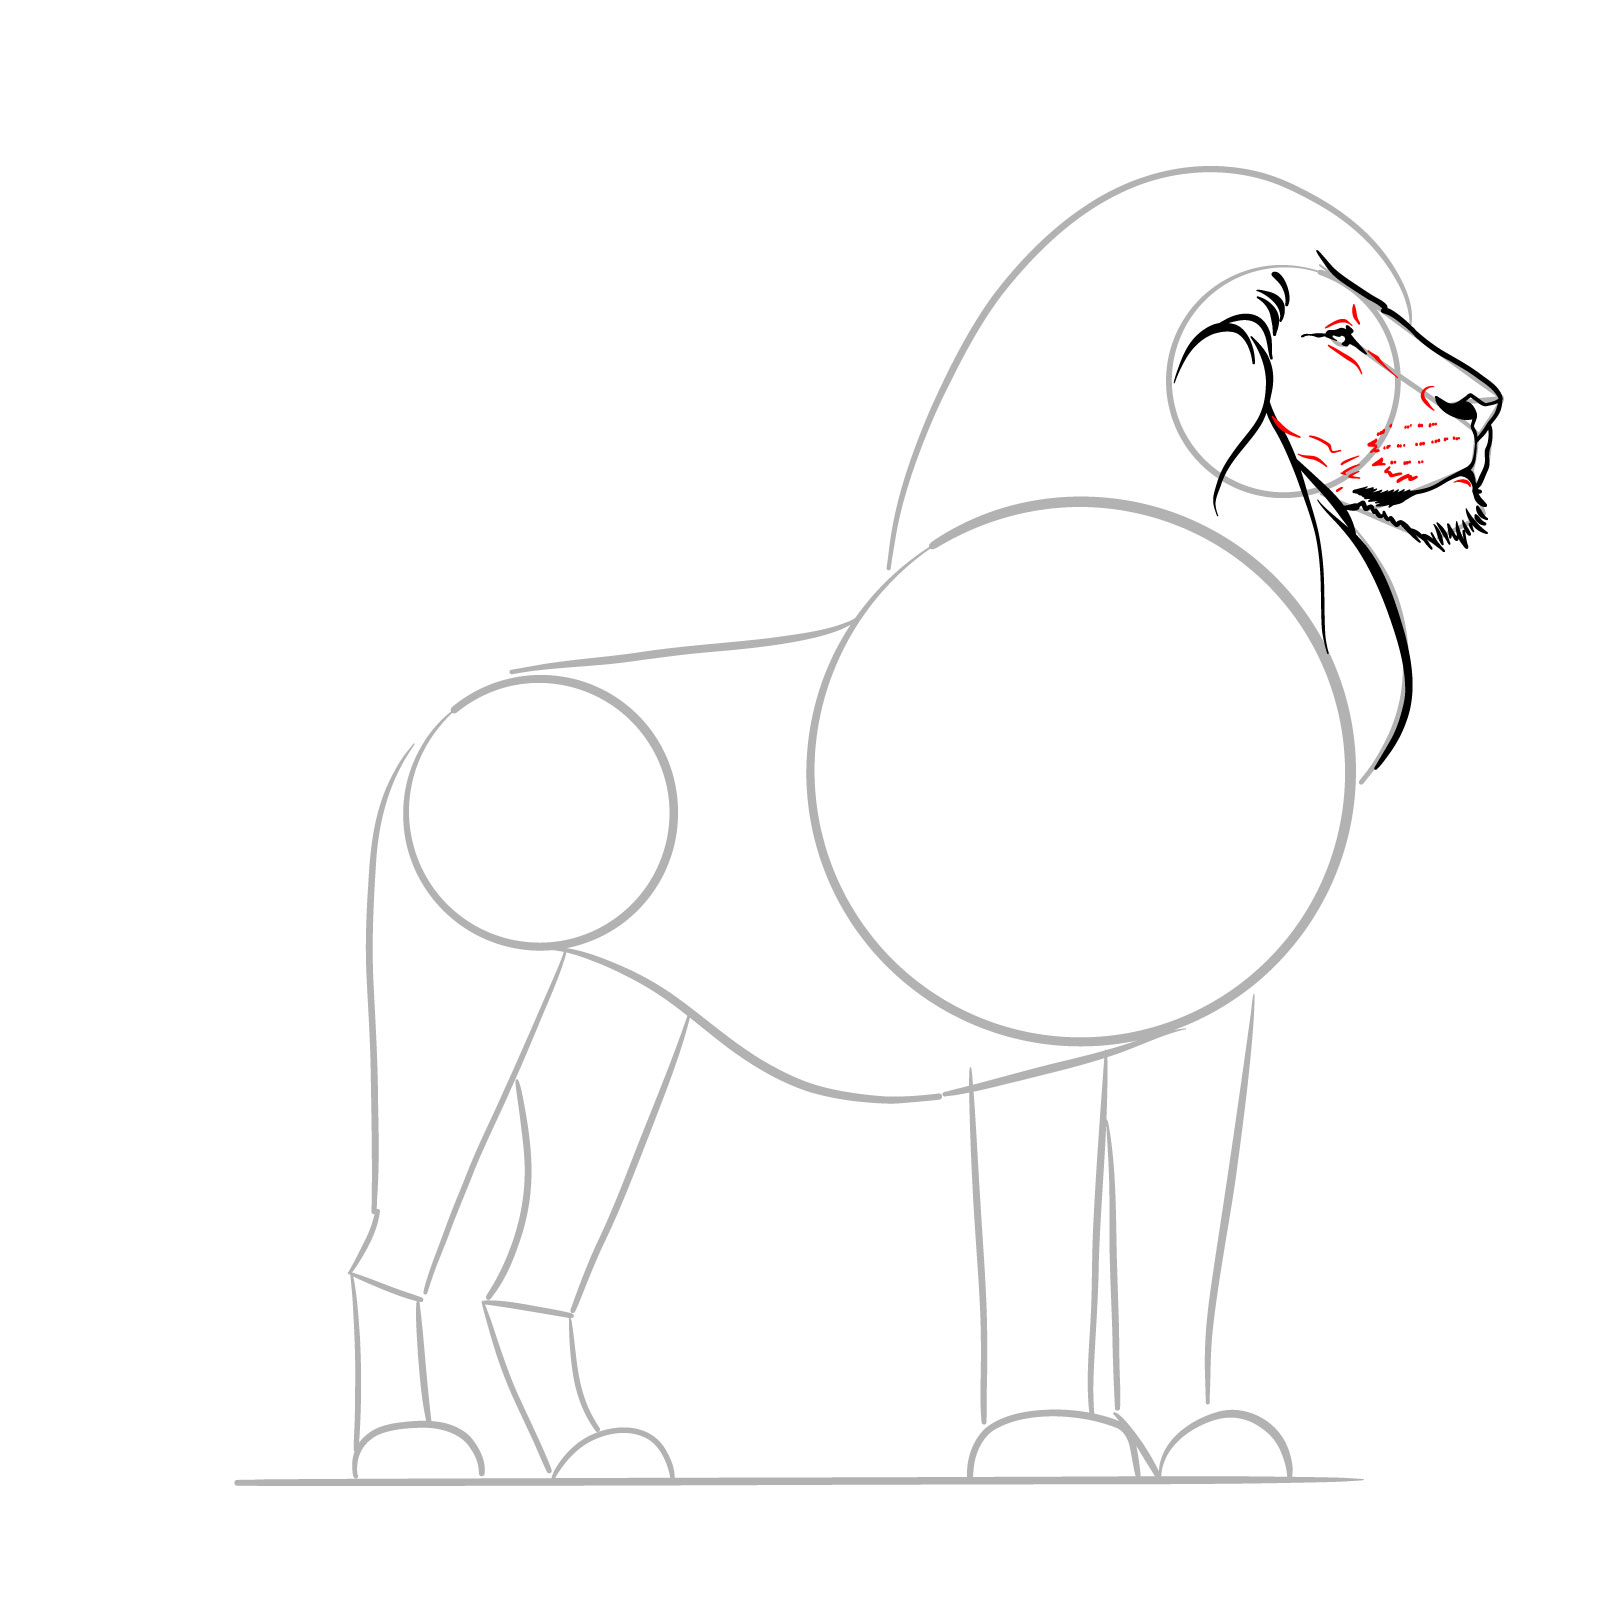 Fine details of the facial features in a how-to-draw a standing lion tutorial - step 08